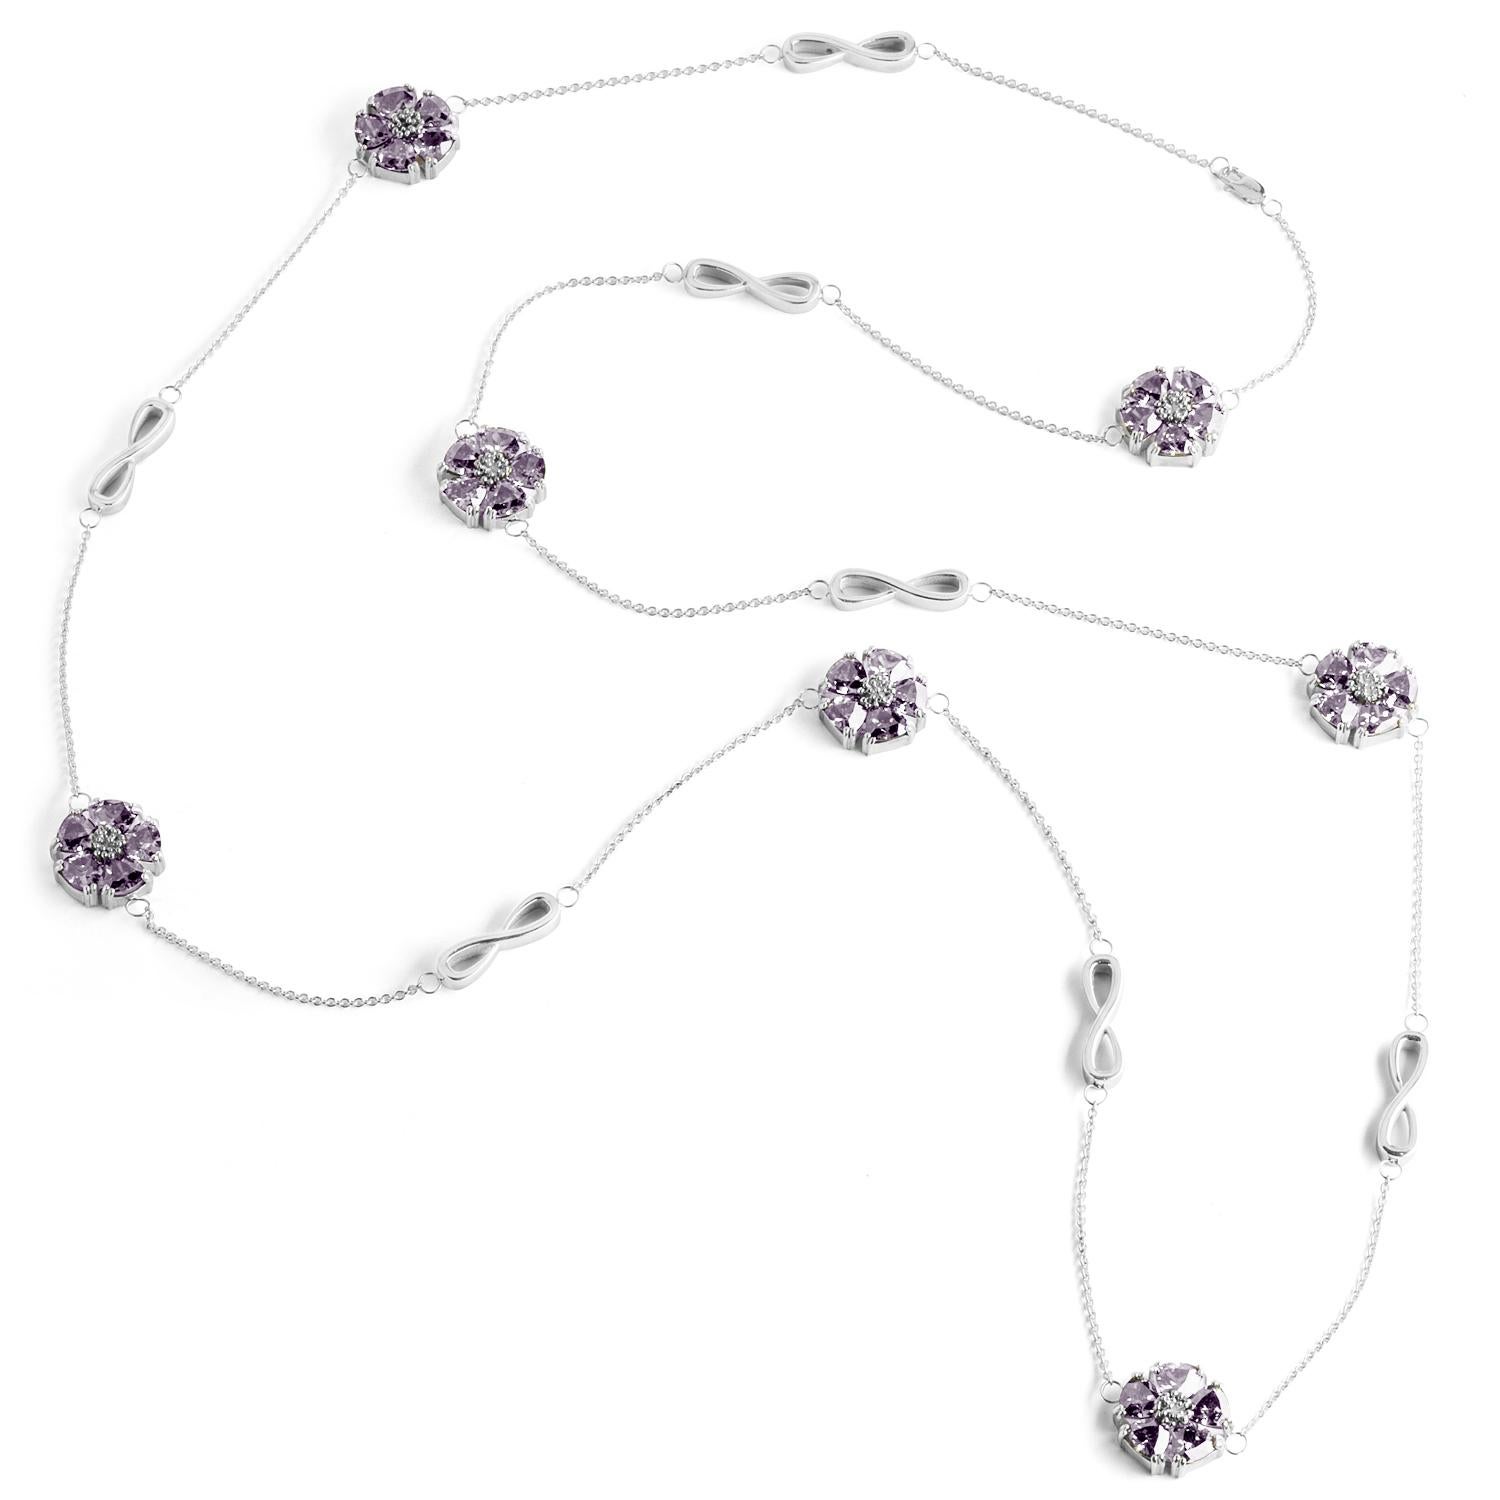 Designed in NYC

.925 Sterling Silver 15 x 7 mm Amethyst Blossom Stone and Infinity Lariat Necklace. No matter the season, allow natural beauty to surround you wherever you go. Blossom stone and infinity lariat necklace: 

Sterling silver